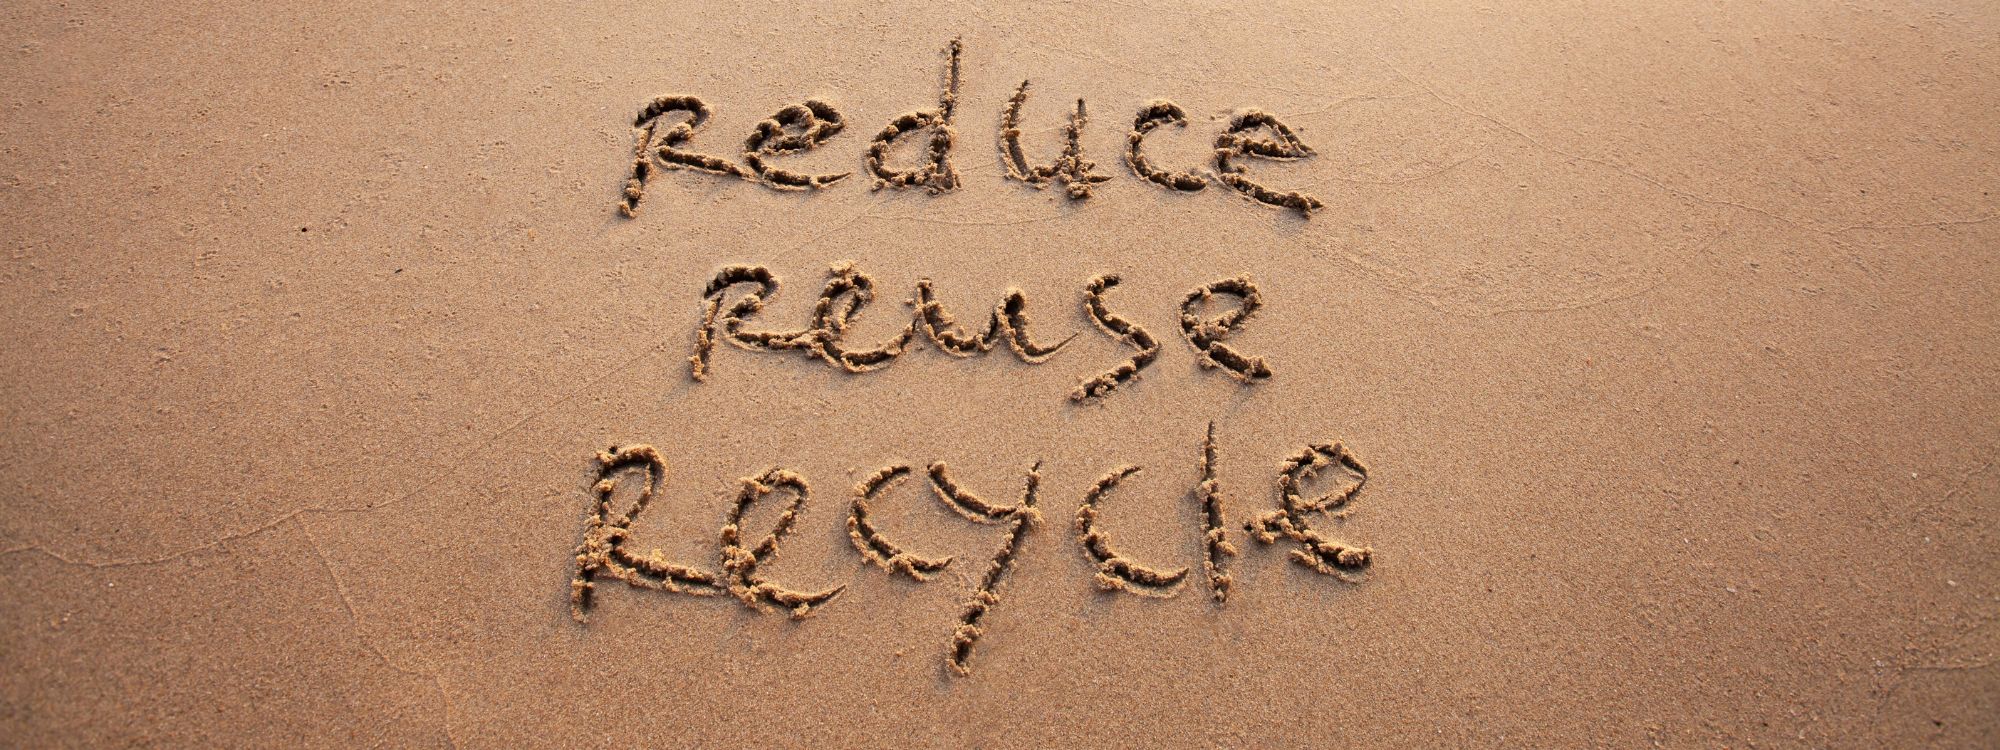 The words Reduce, Reuse, and Recycle drawn in the sand